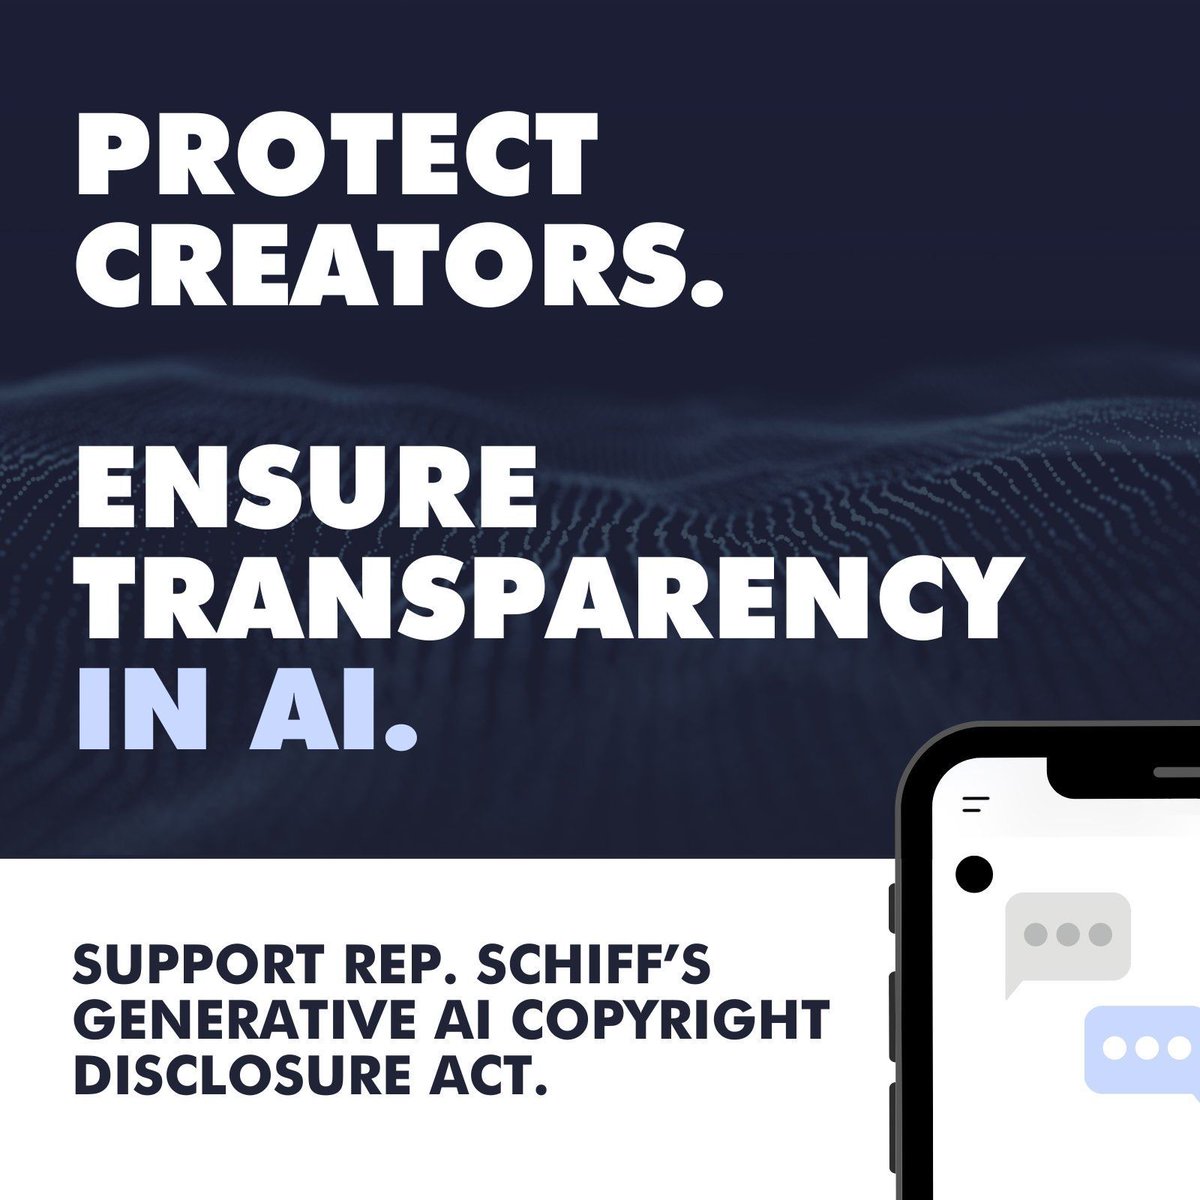 The WGAE supports the Generative Copyright Disclosure Act from @repadamschiff that would require companies disclose all the copyrighted scripts, news stories and other creative content they use to train Al.